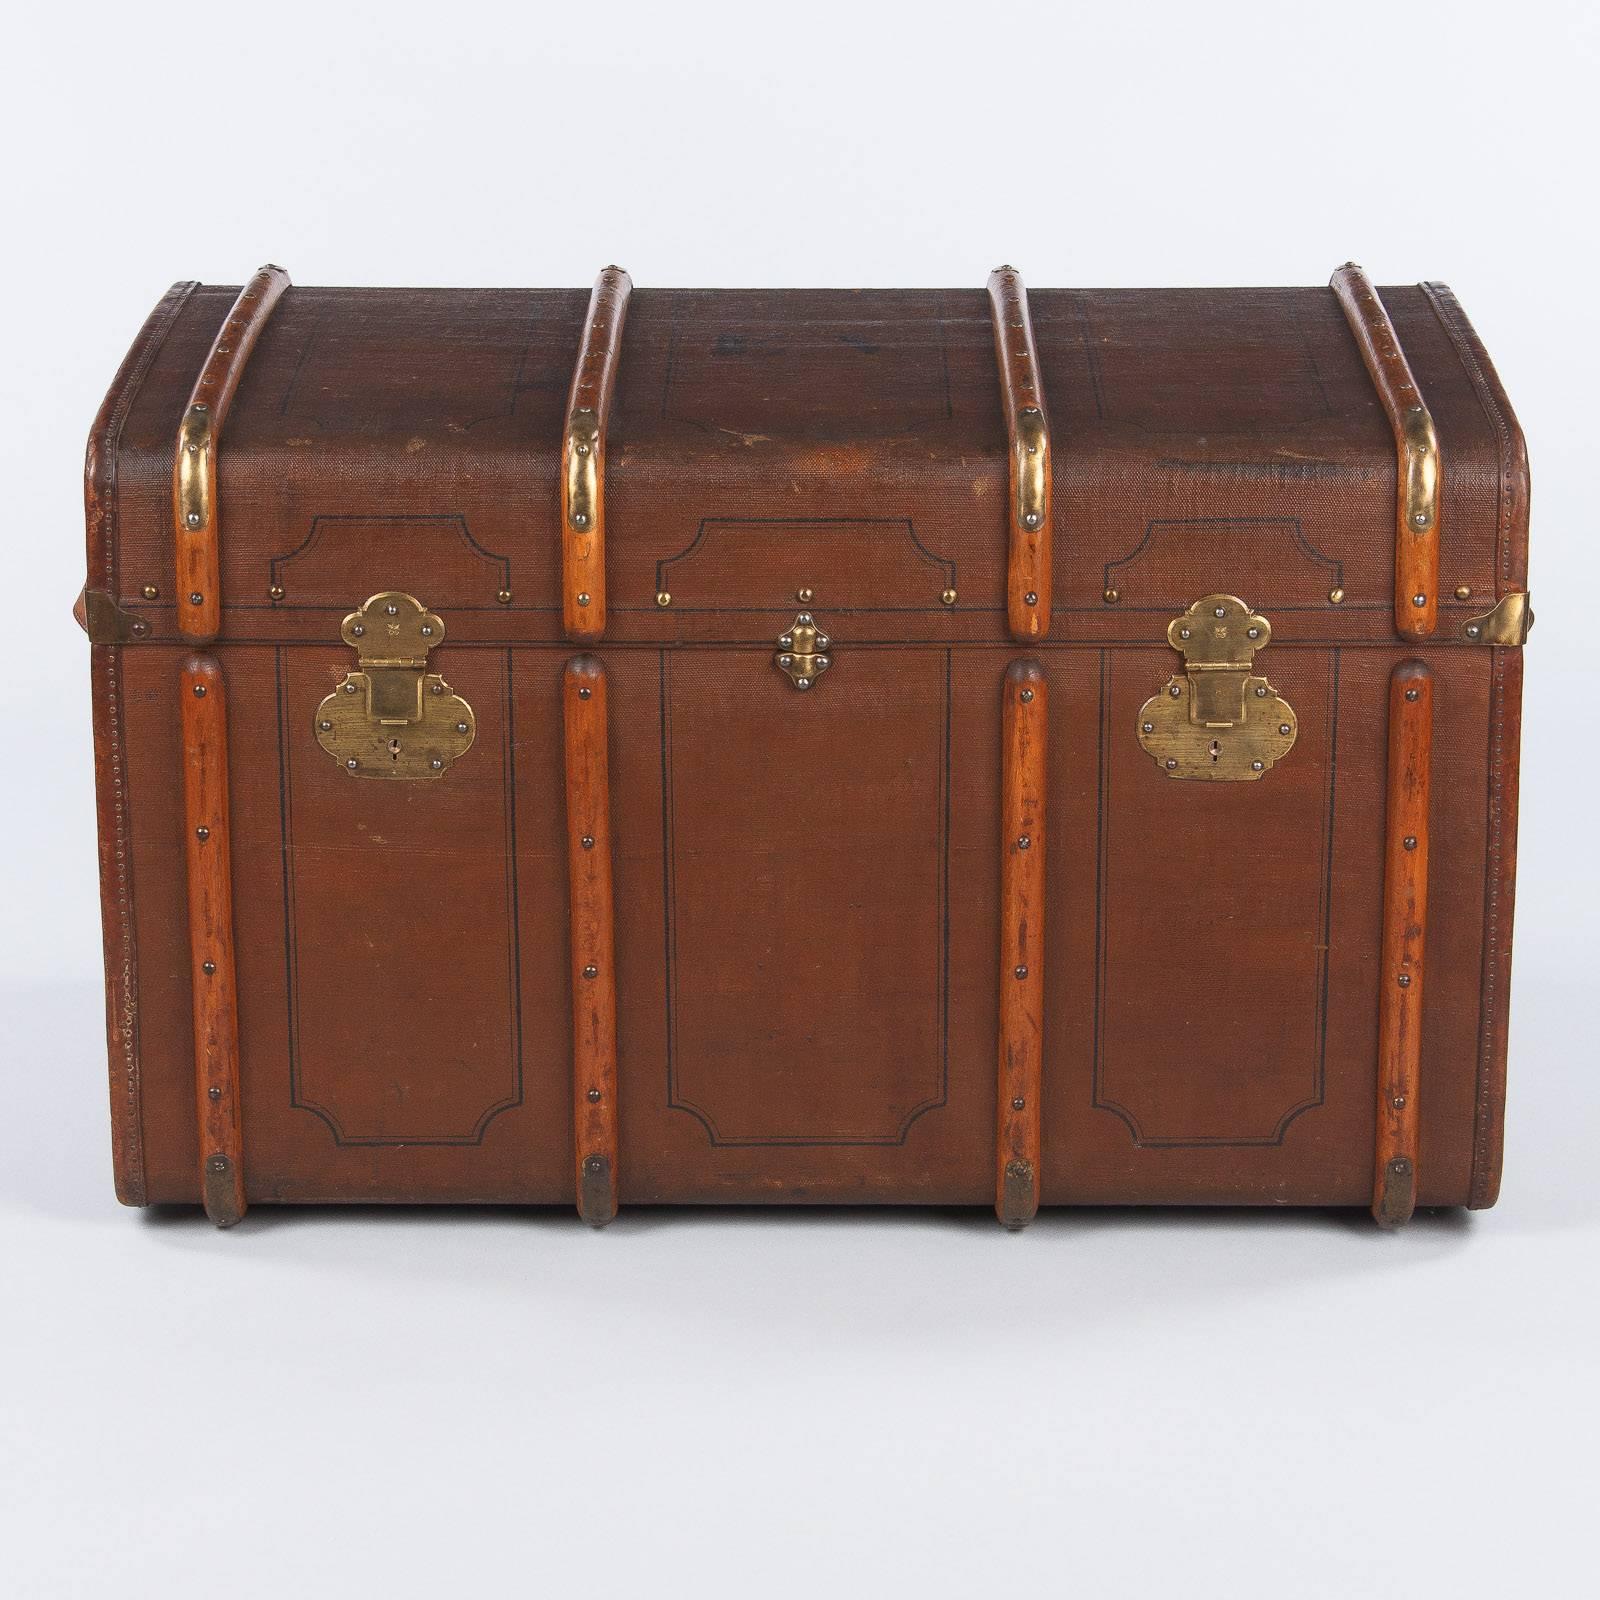 A French traveling trunk from the early 1900s purchased in Lyon. The trunk is made of poplar lined with a dark brown oil cloth with a black trim and the engraved initials E.V. The side handles are leather and the locks are brass. The inside features